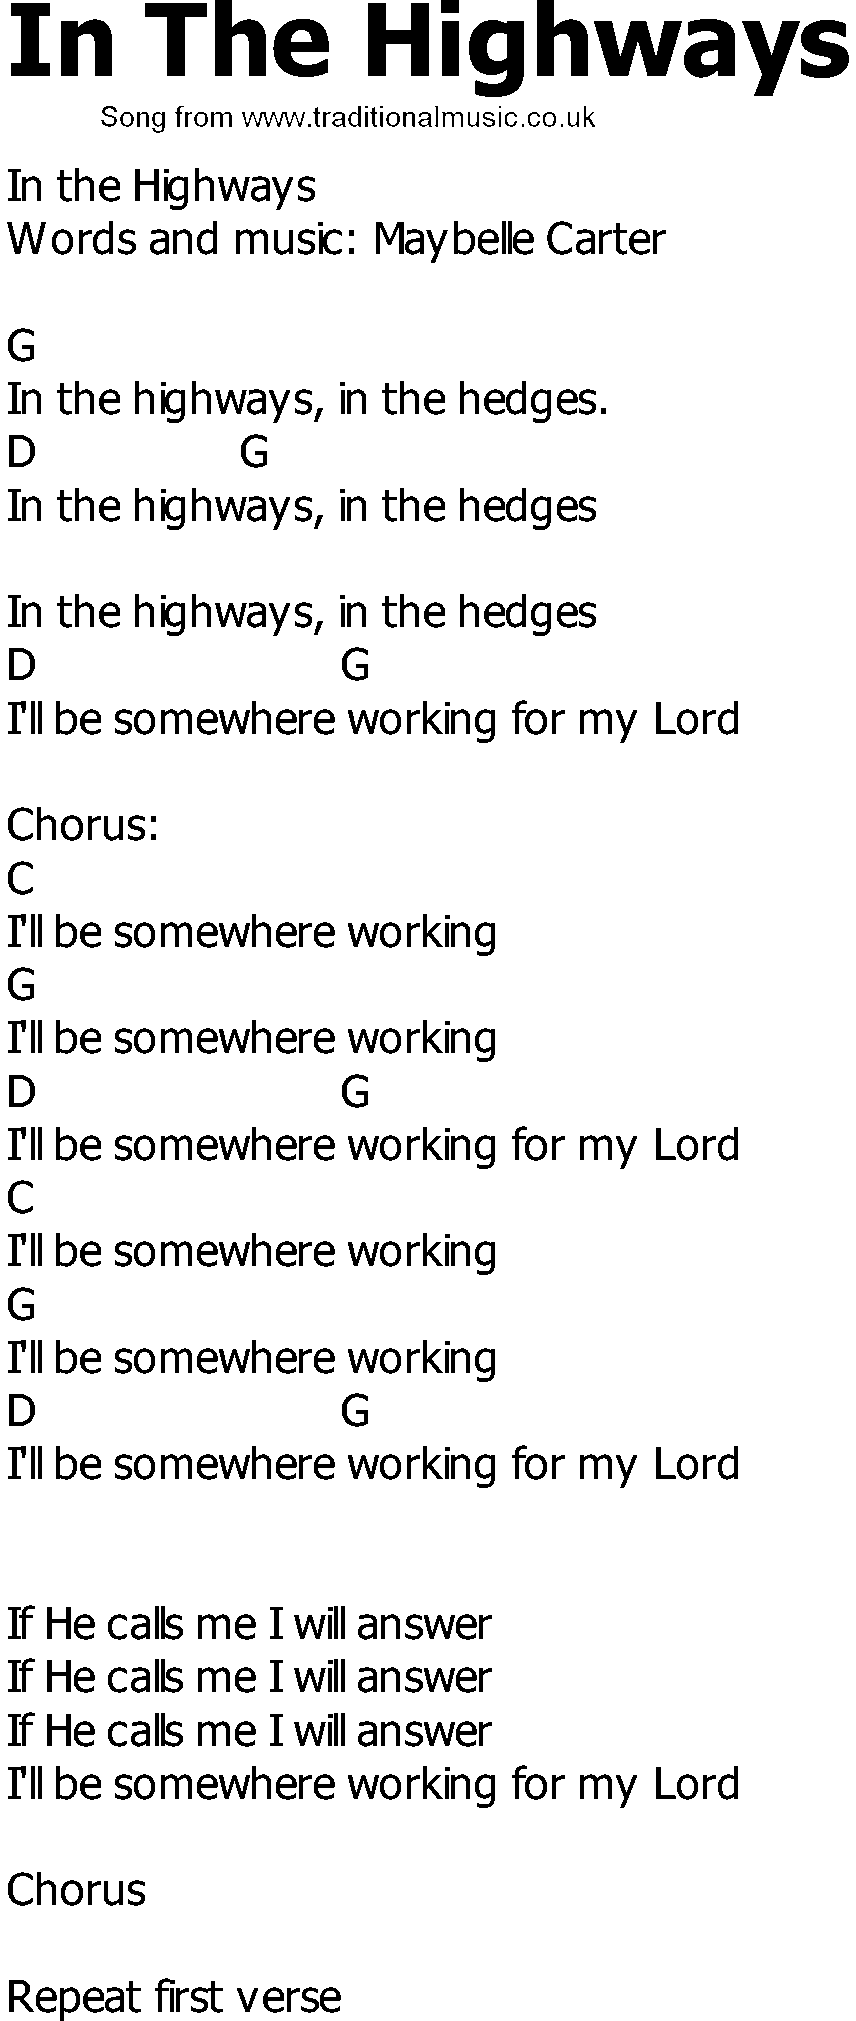 Old Country song lyrics with chords - In The Highways